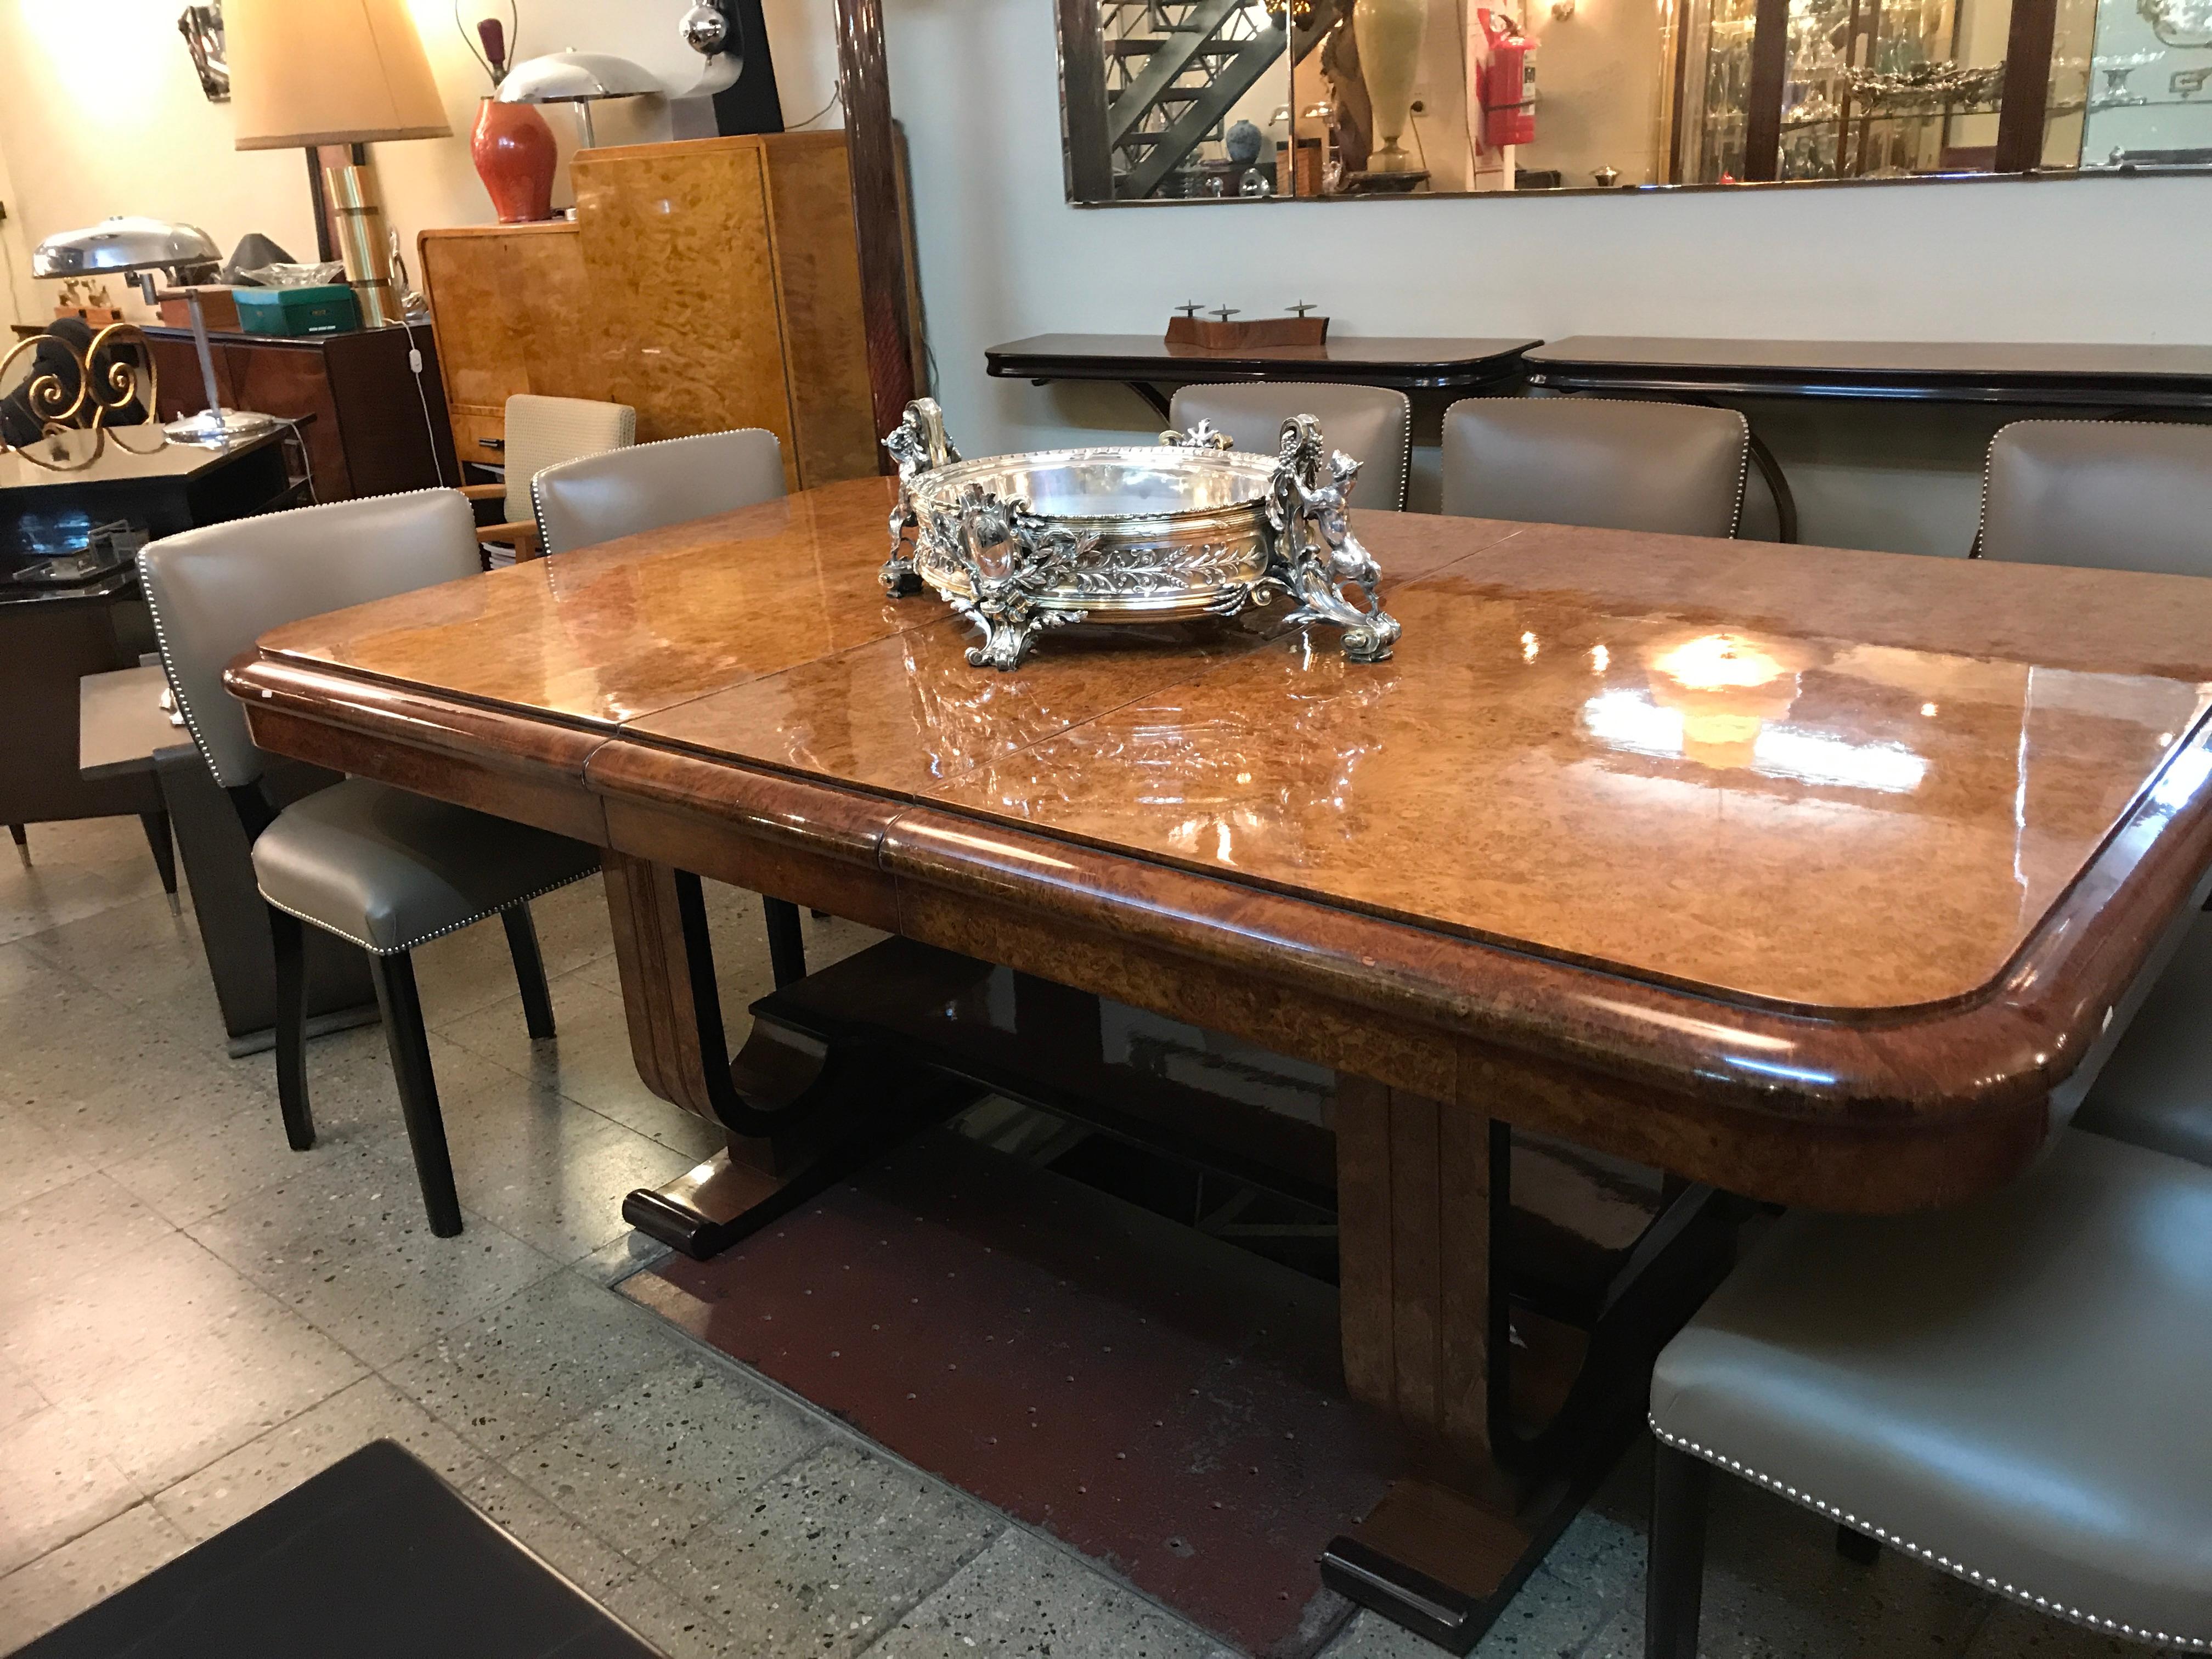 Centerplace, Sign: Christofle 

Metal: Silver plated
We have specialized in the sale of Art Deco and Art Nouveau and Vintage styles since 1982. If you have any questions we are at your disposal.
Pushing the button that reads 'View All From